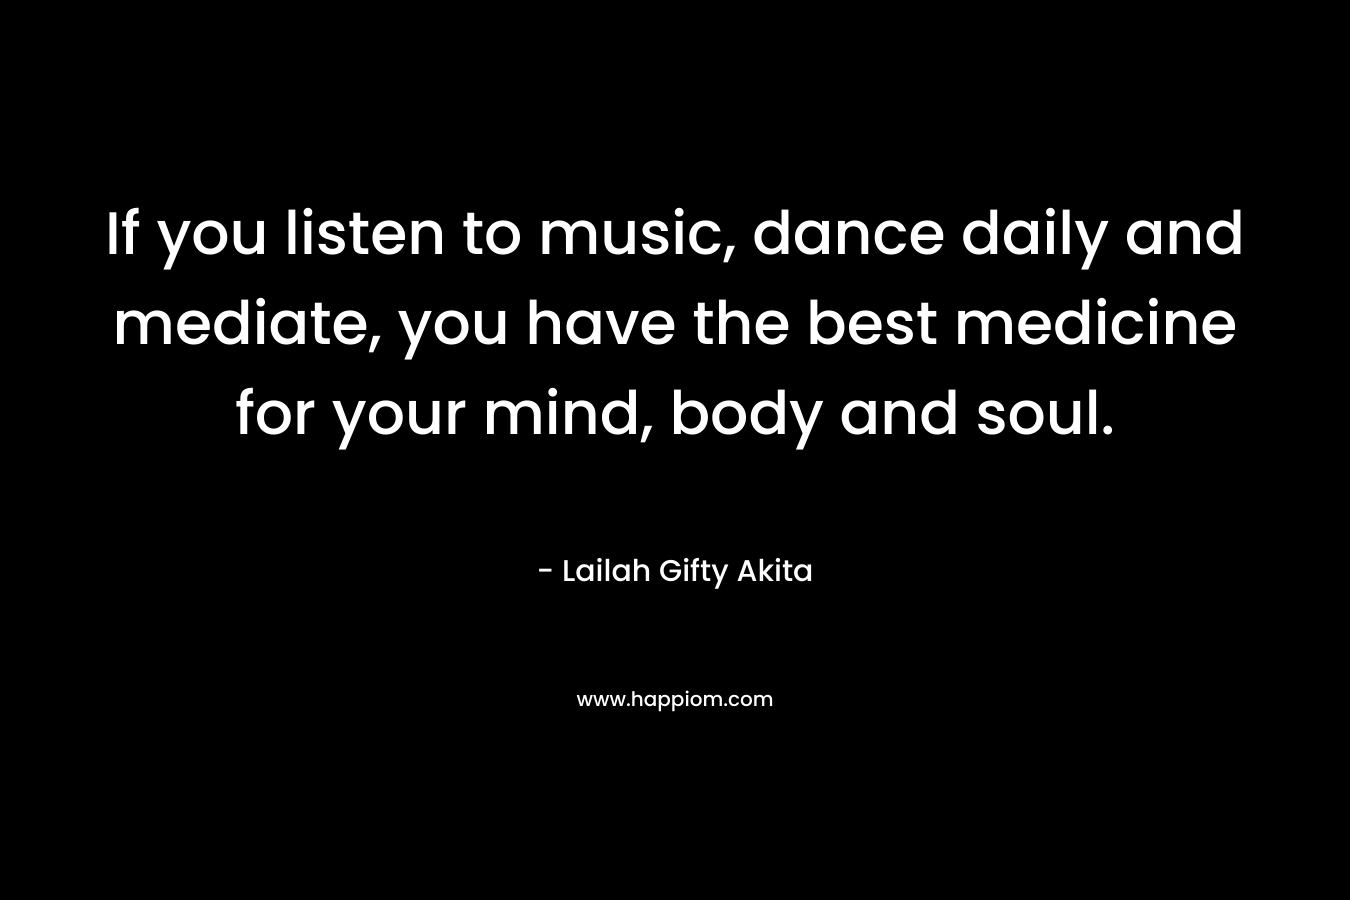 If you listen to music, dance daily and mediate, you have the best medicine for your mind, body and soul.